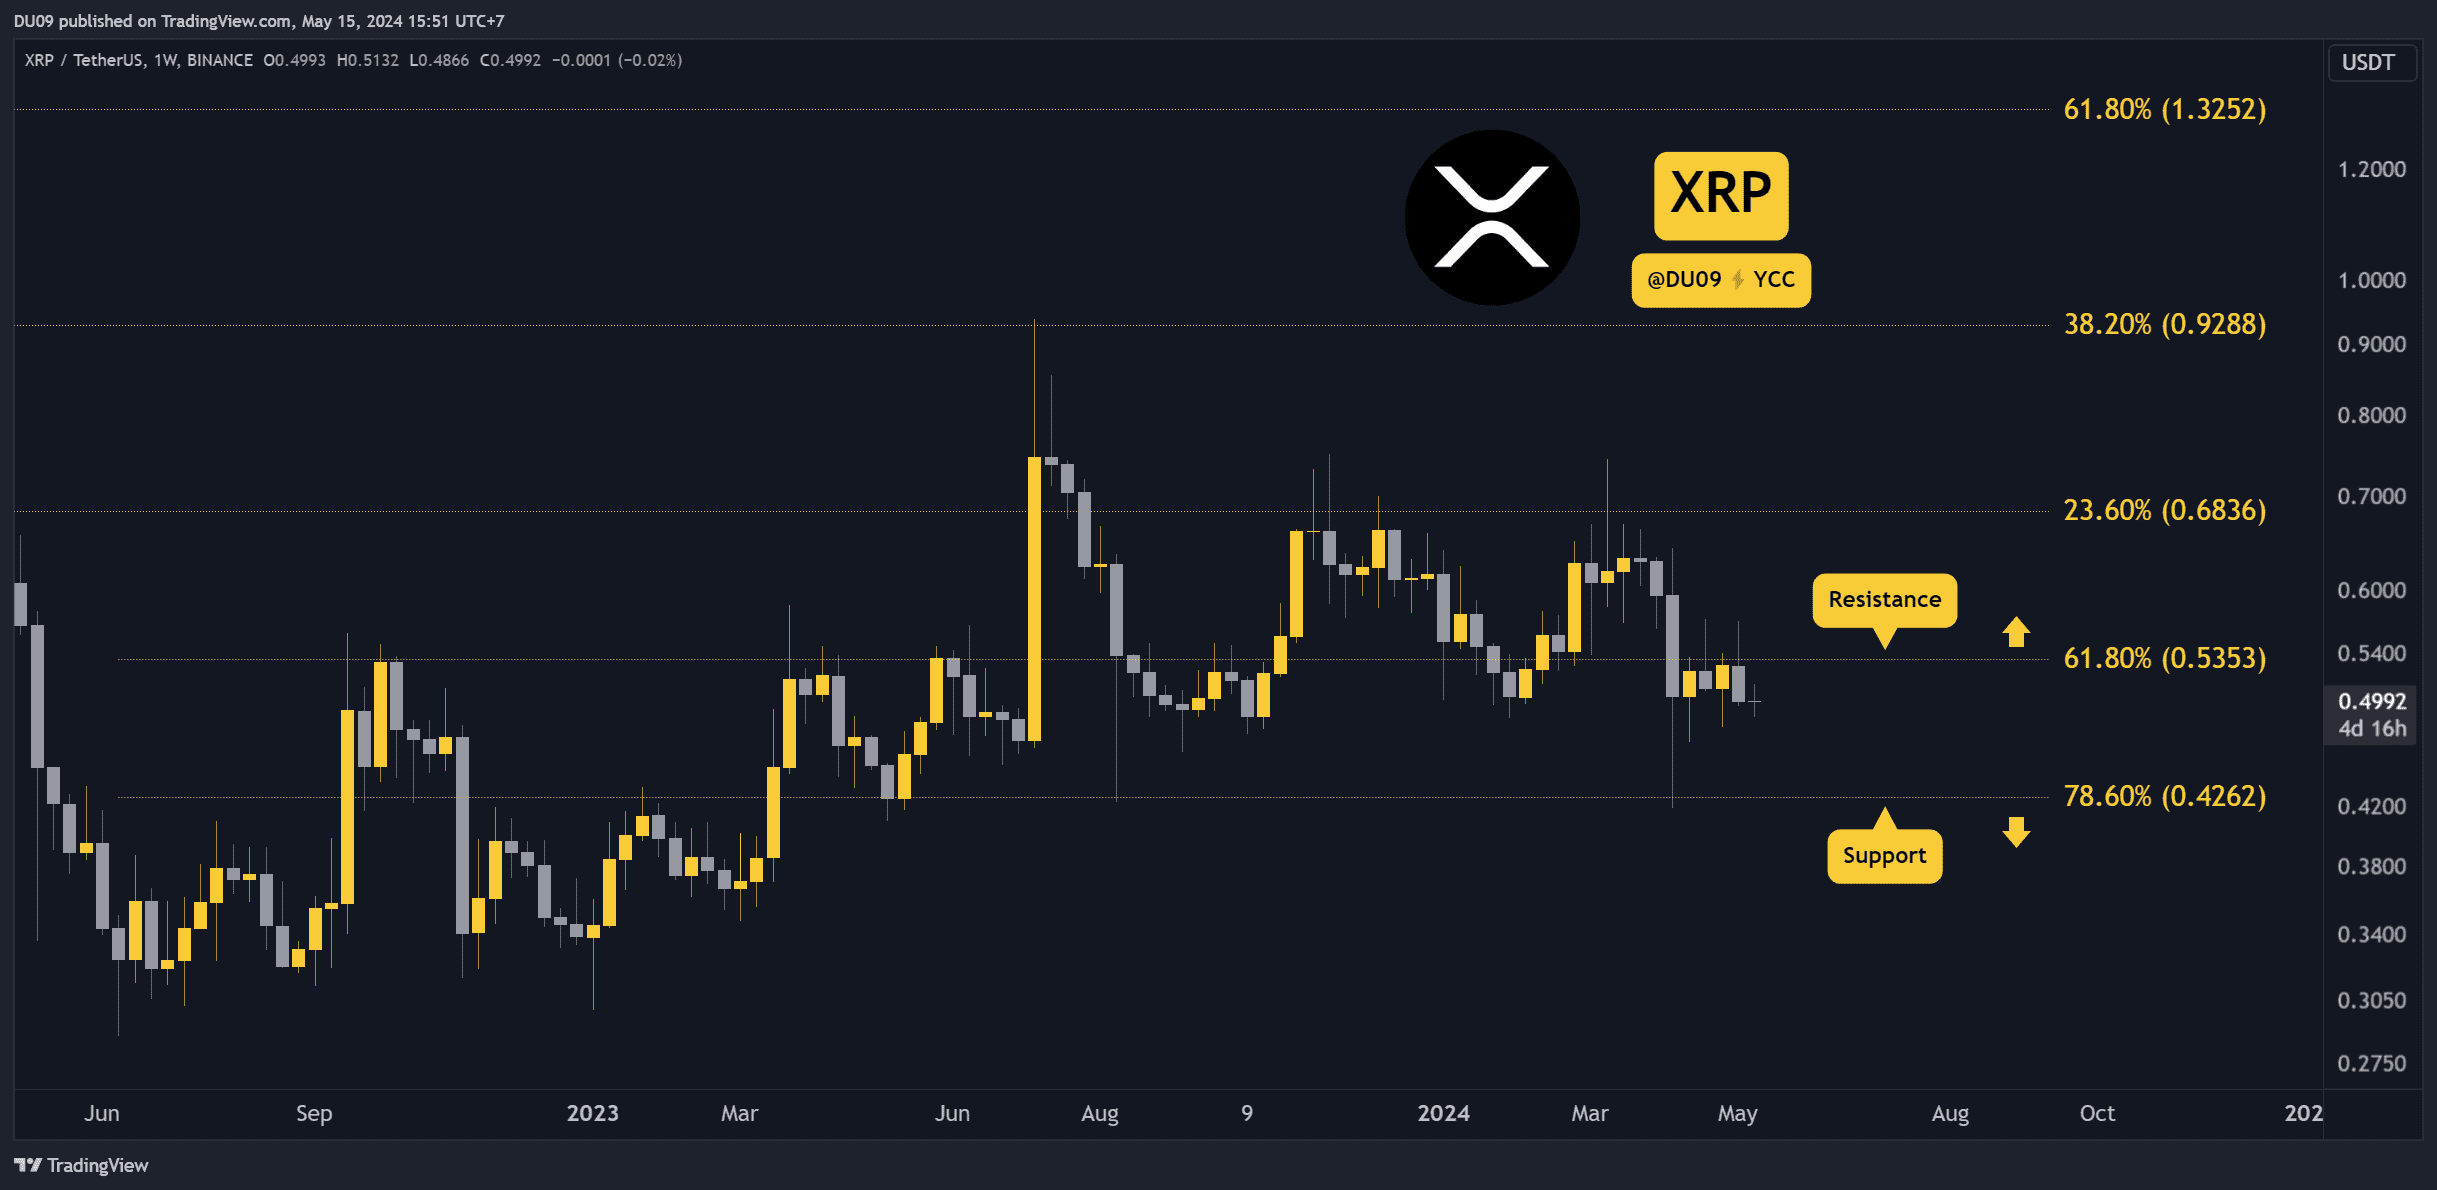 Three-important-factors-to-watch-for-xrp’s-price-in-the-short-term-(analysis)